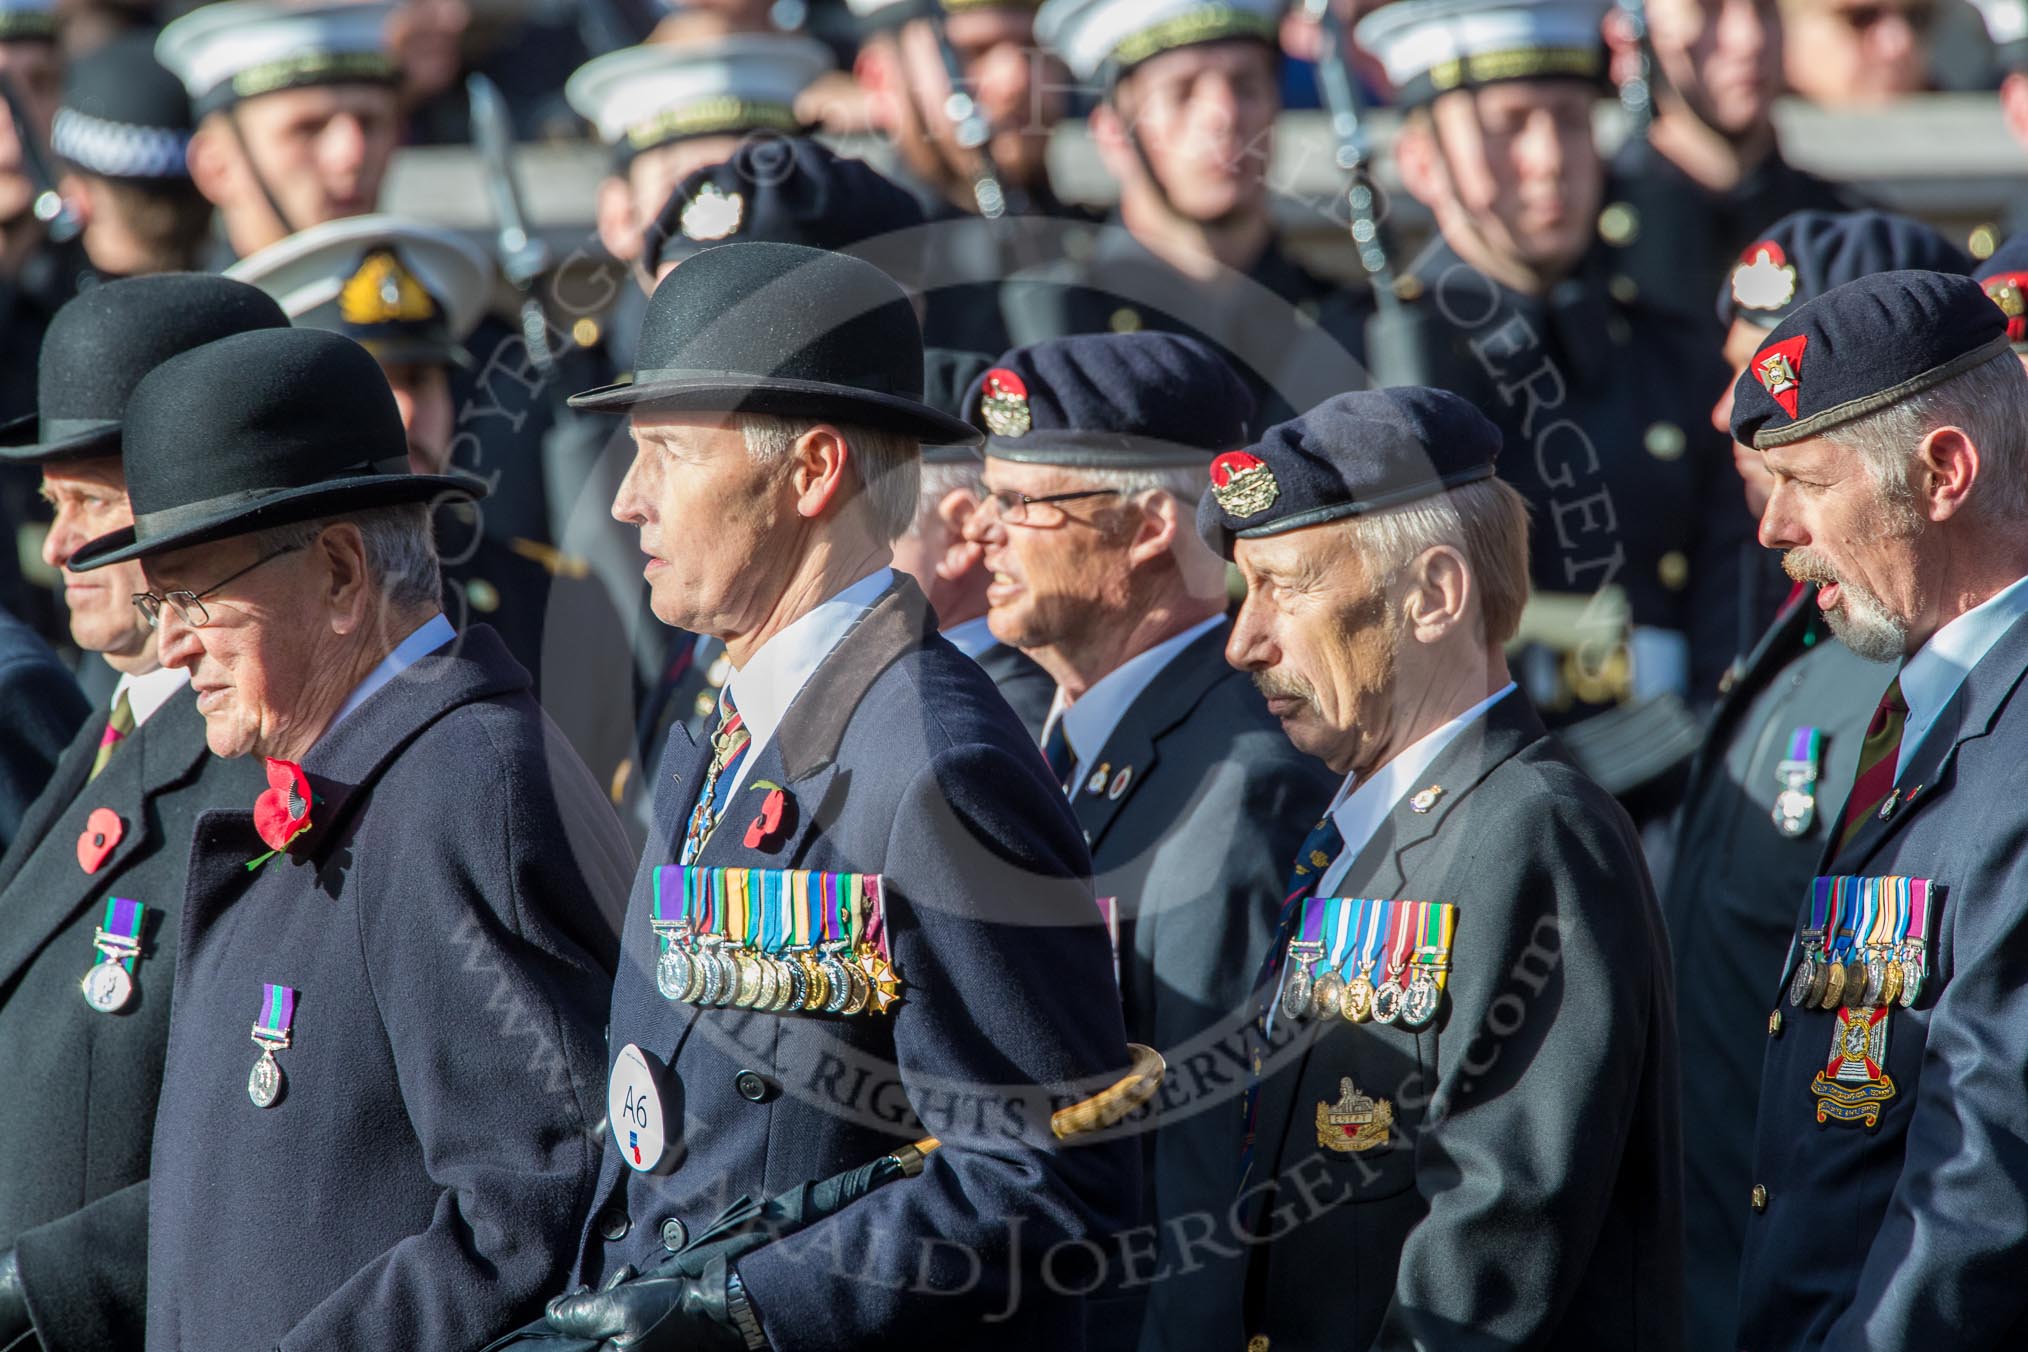 Regimental Association of The Rifles and The Royal Gloucestershire (Group A6, 33 members) during the Royal British Legion March Past on Remembrance Sunday at the Cenotaph, Whitehall, Westminster, London, 11 November 2018, 11:56.